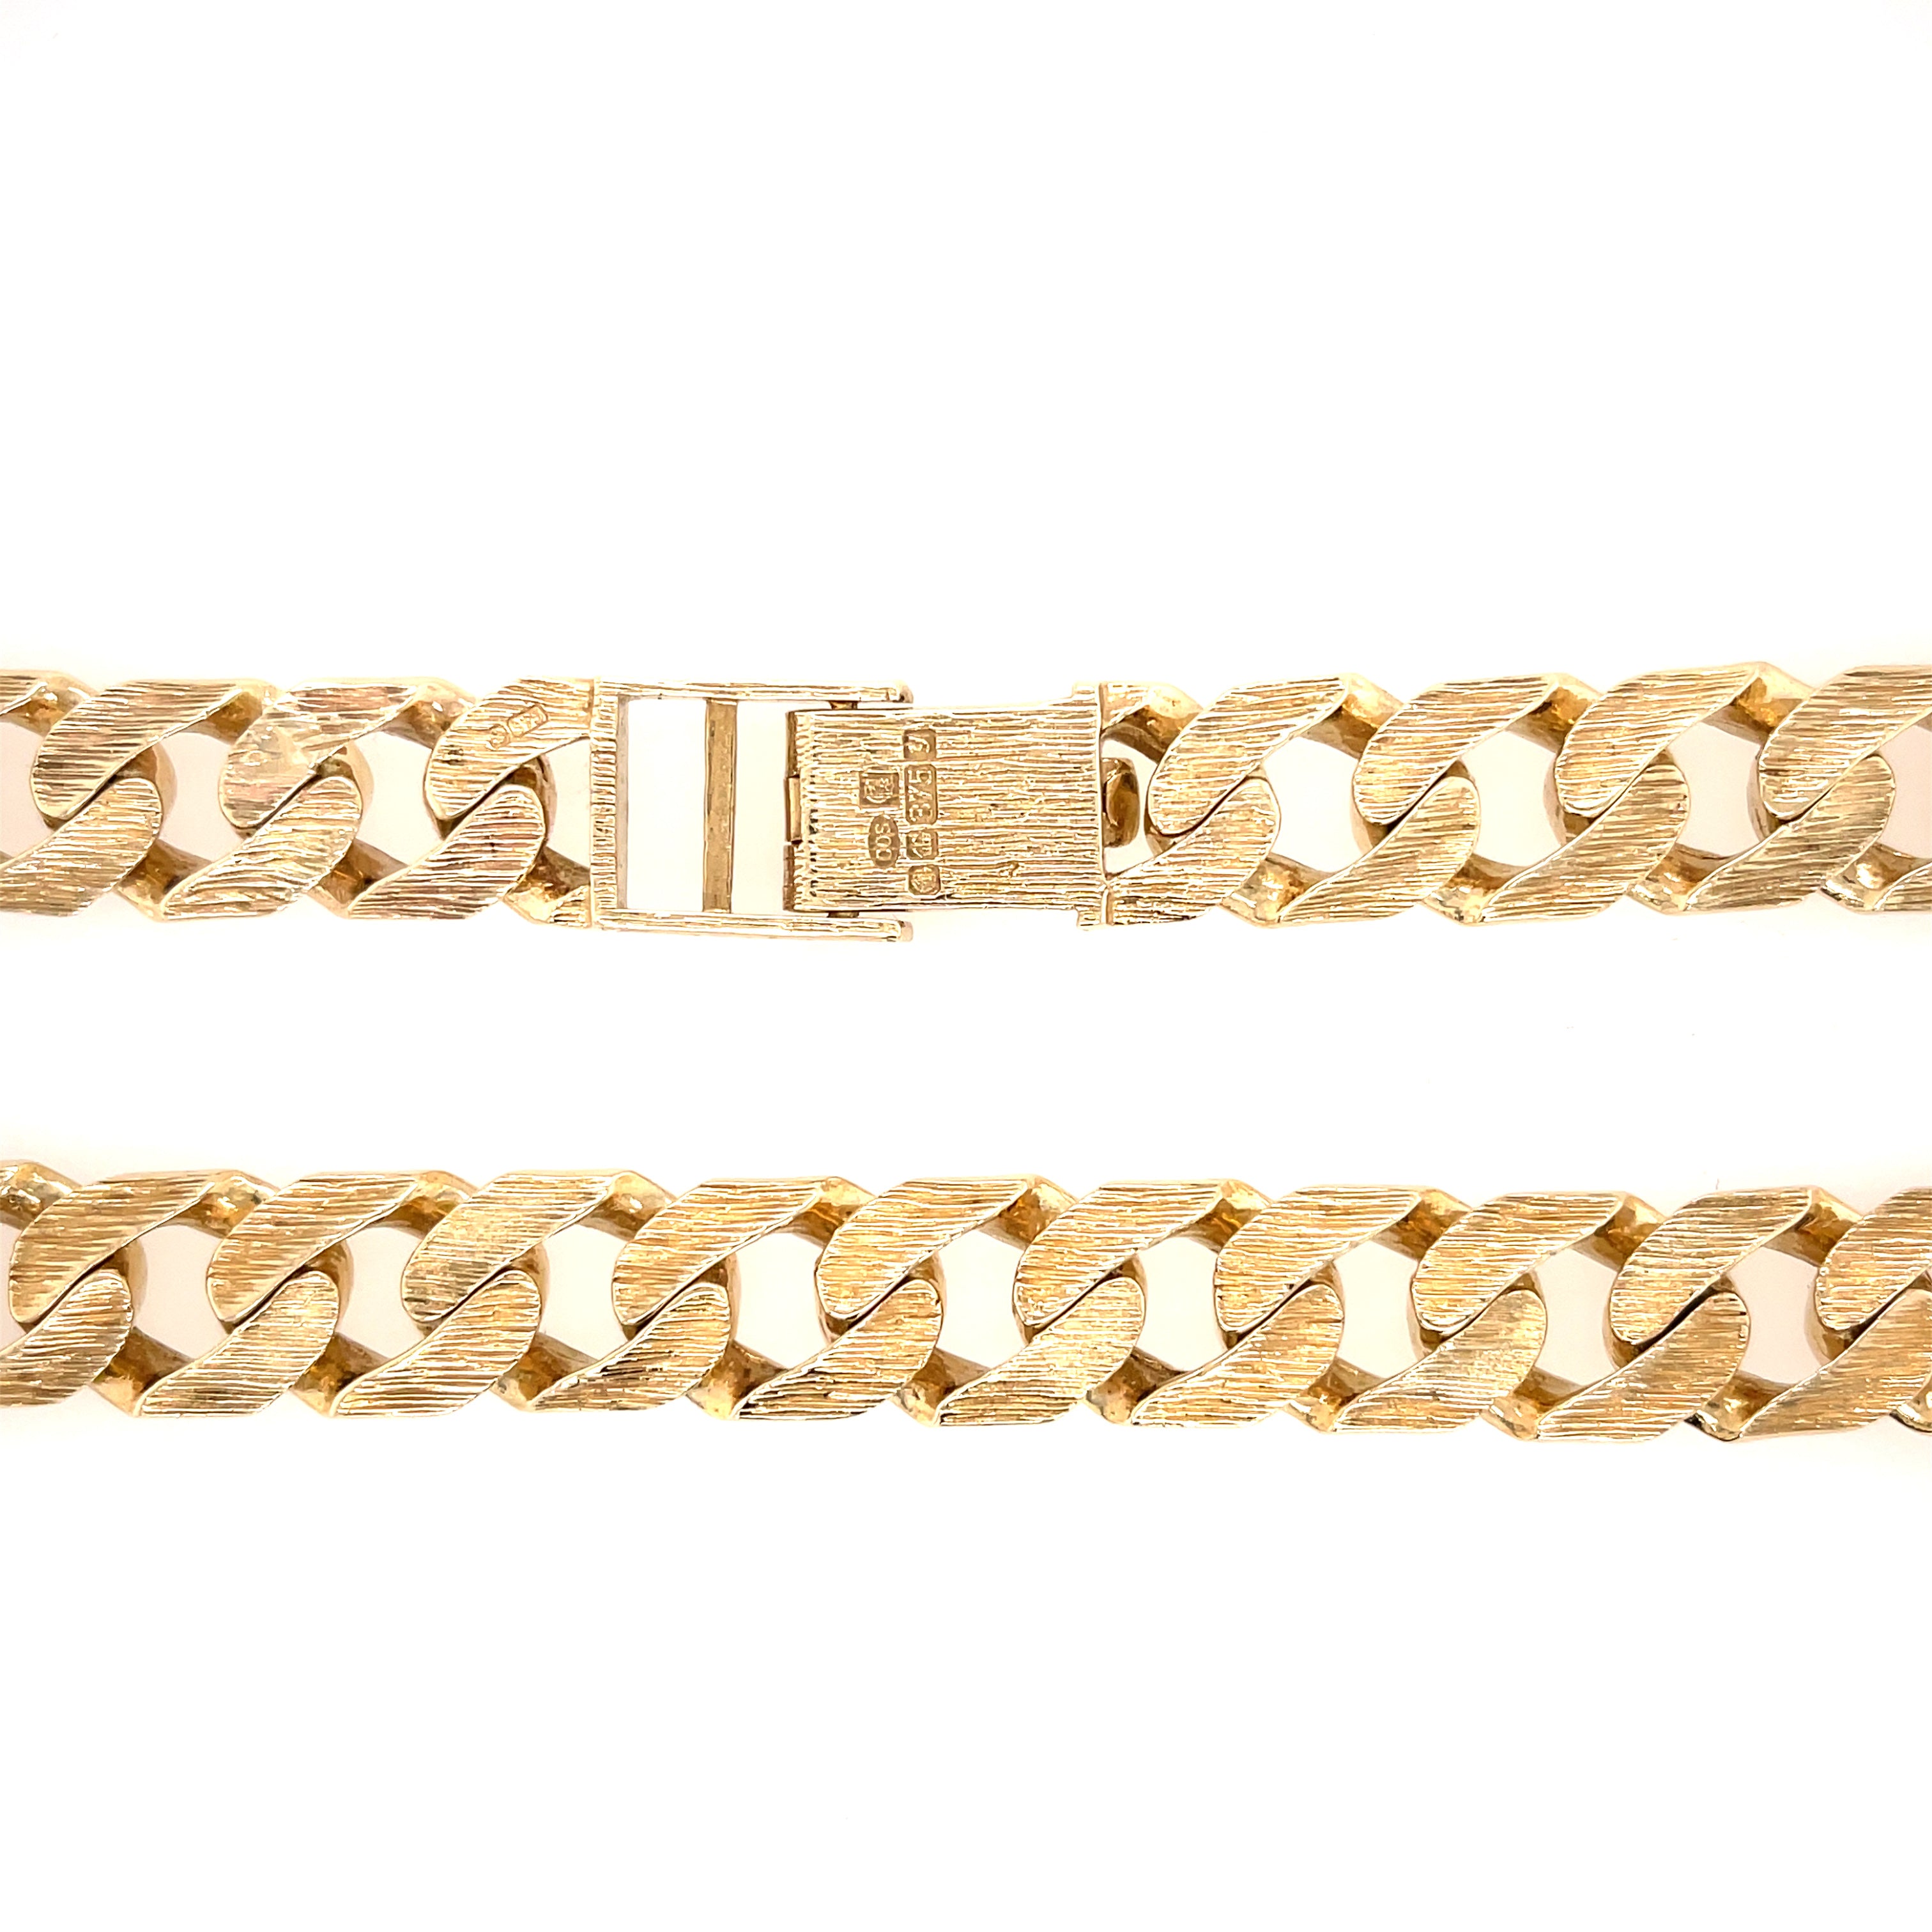 9ct Yellow Gold 22" Heavy Patterned 5 Ounce Curb Chain - 154.60g